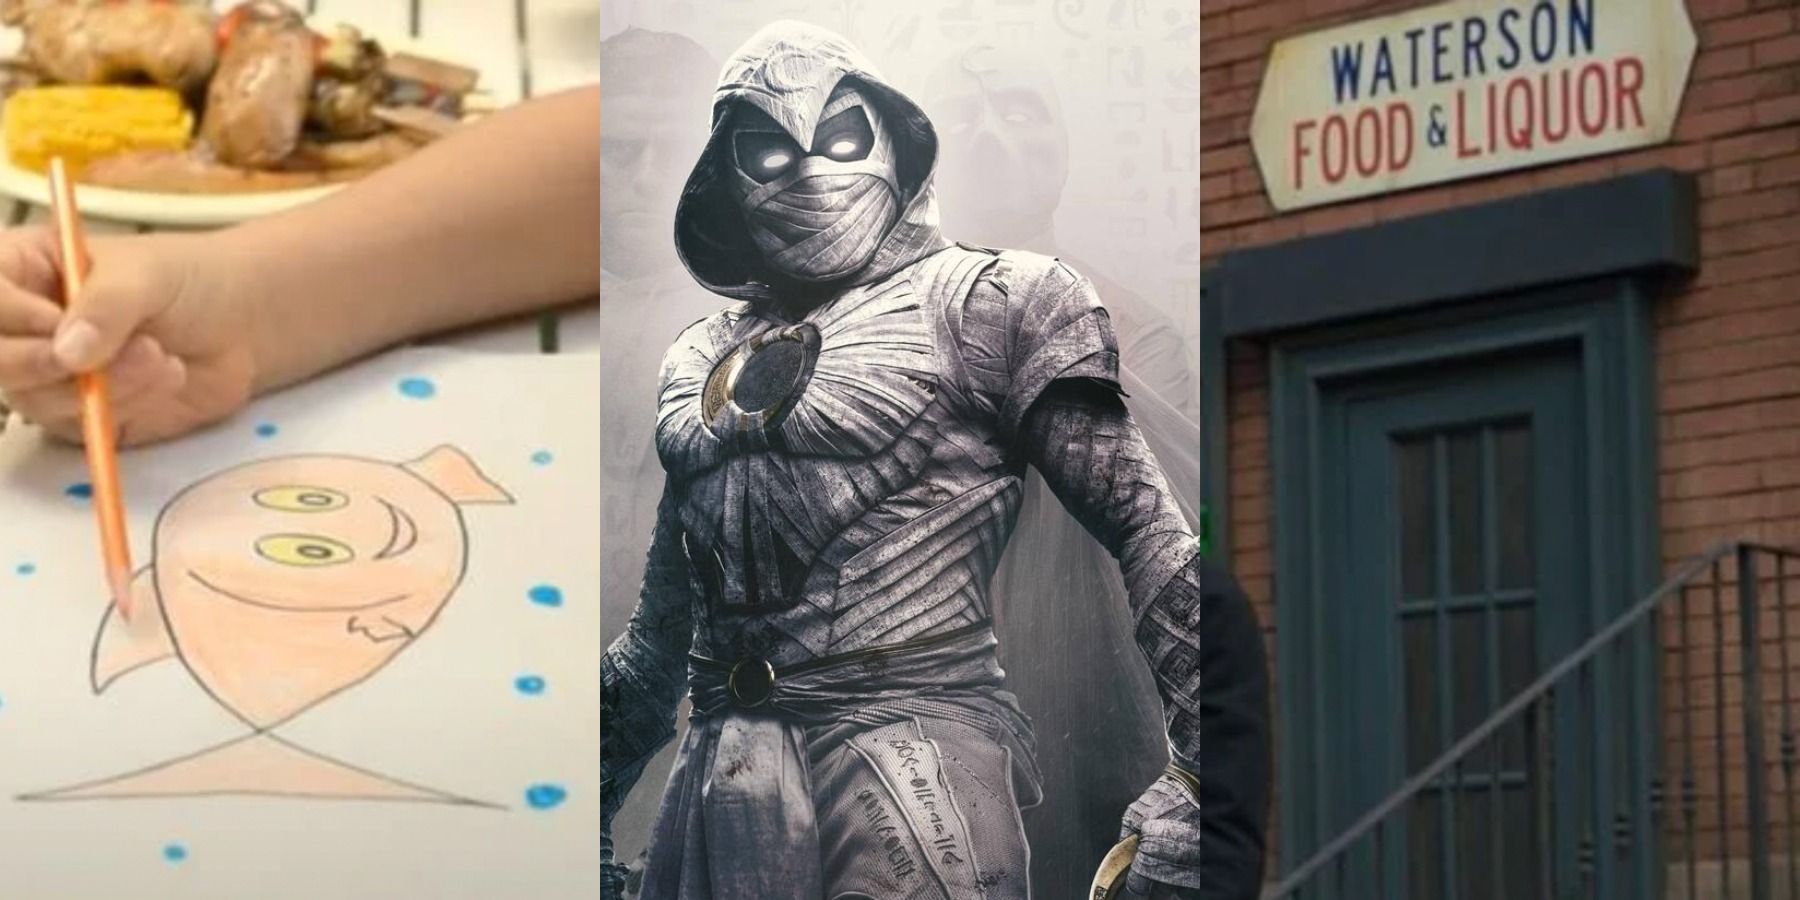 A split image depicts a goldfish drawing, Moon Knight, and Watersons Food & Liquor sign